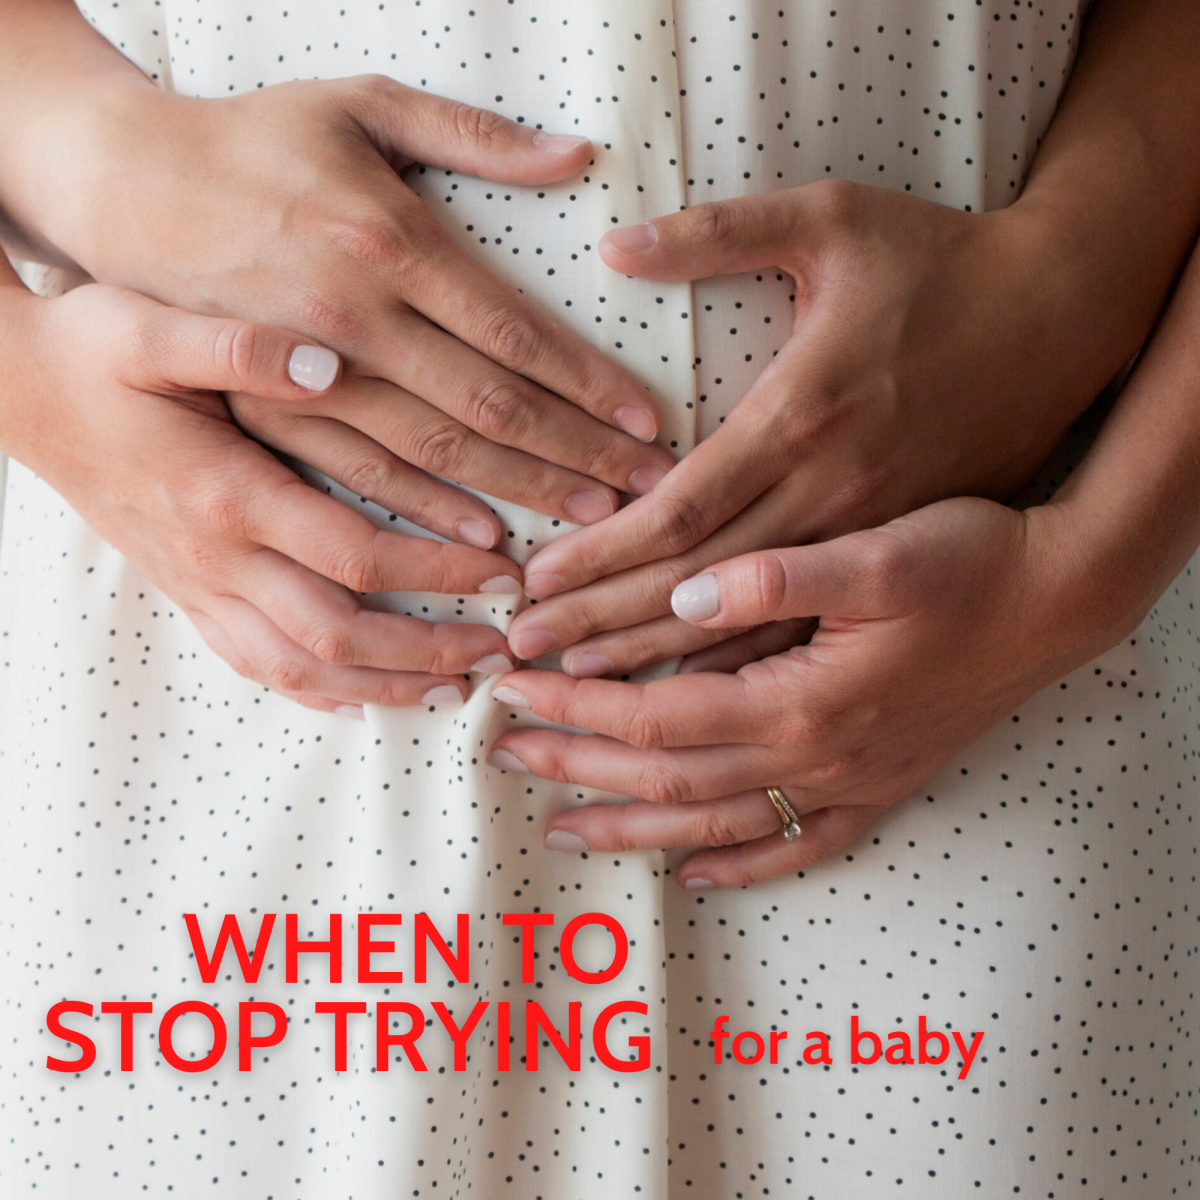 When it's time to stop trying to have a baby. 